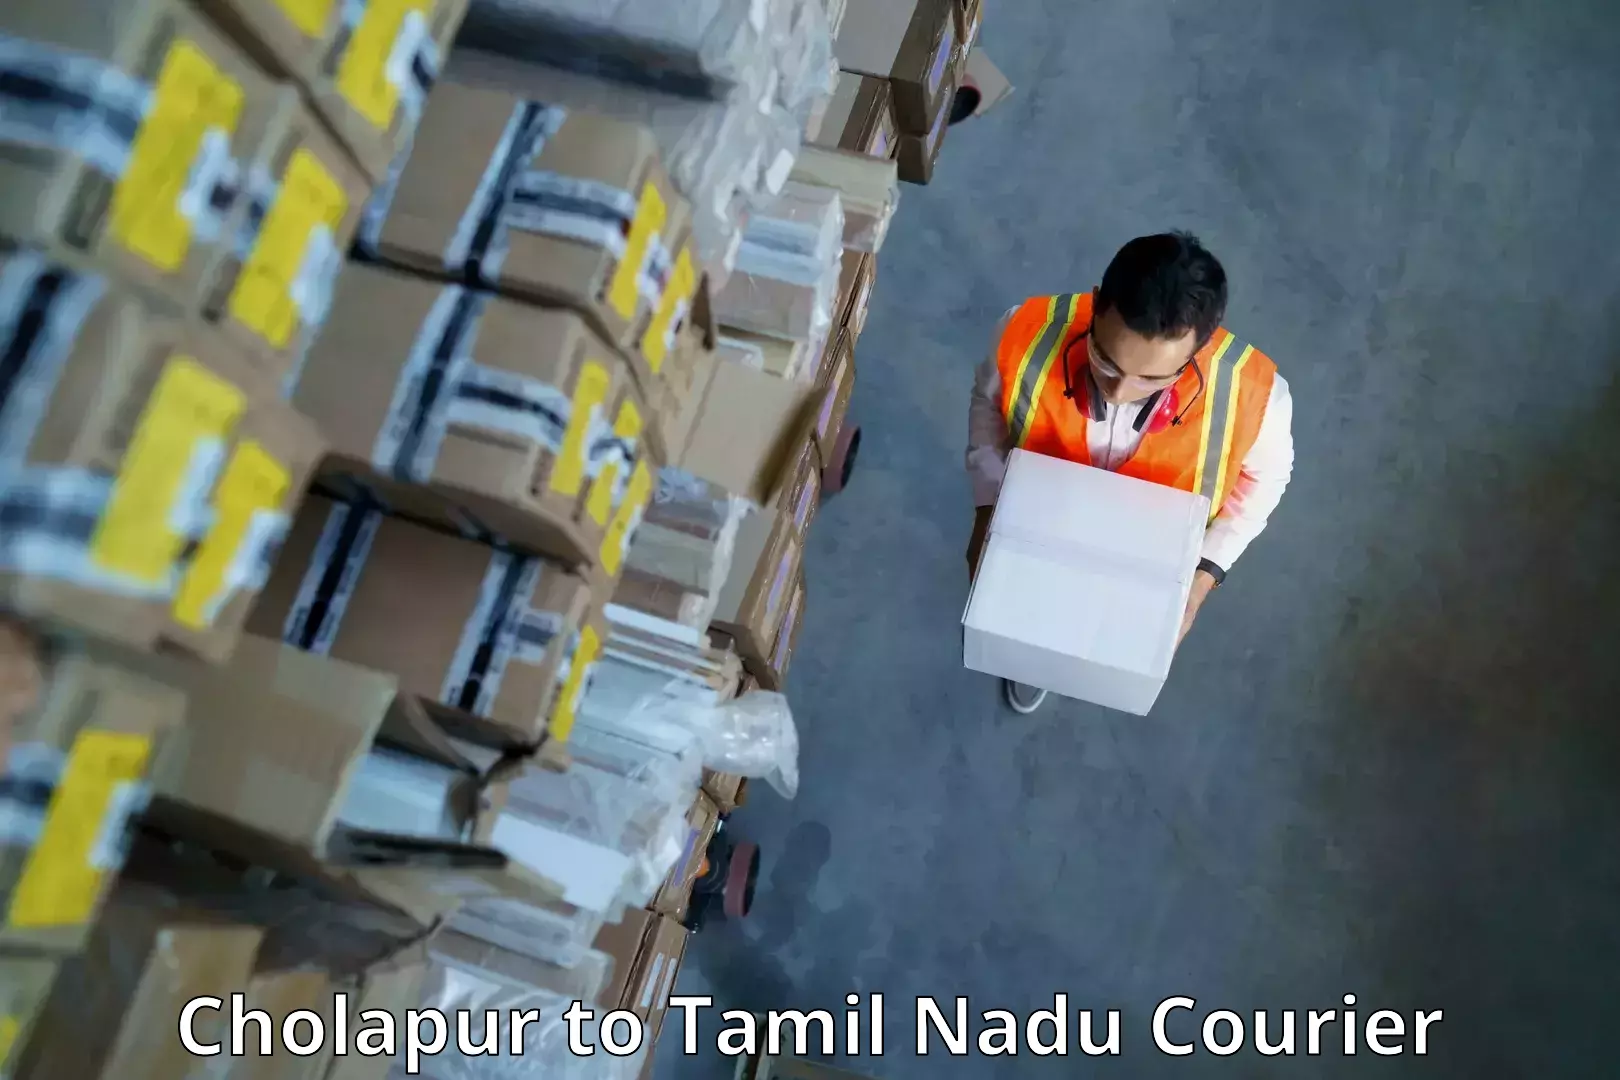 Advanced shipping network Cholapur to Sri Ramachandra Institute of Higher Education and Research Chennai